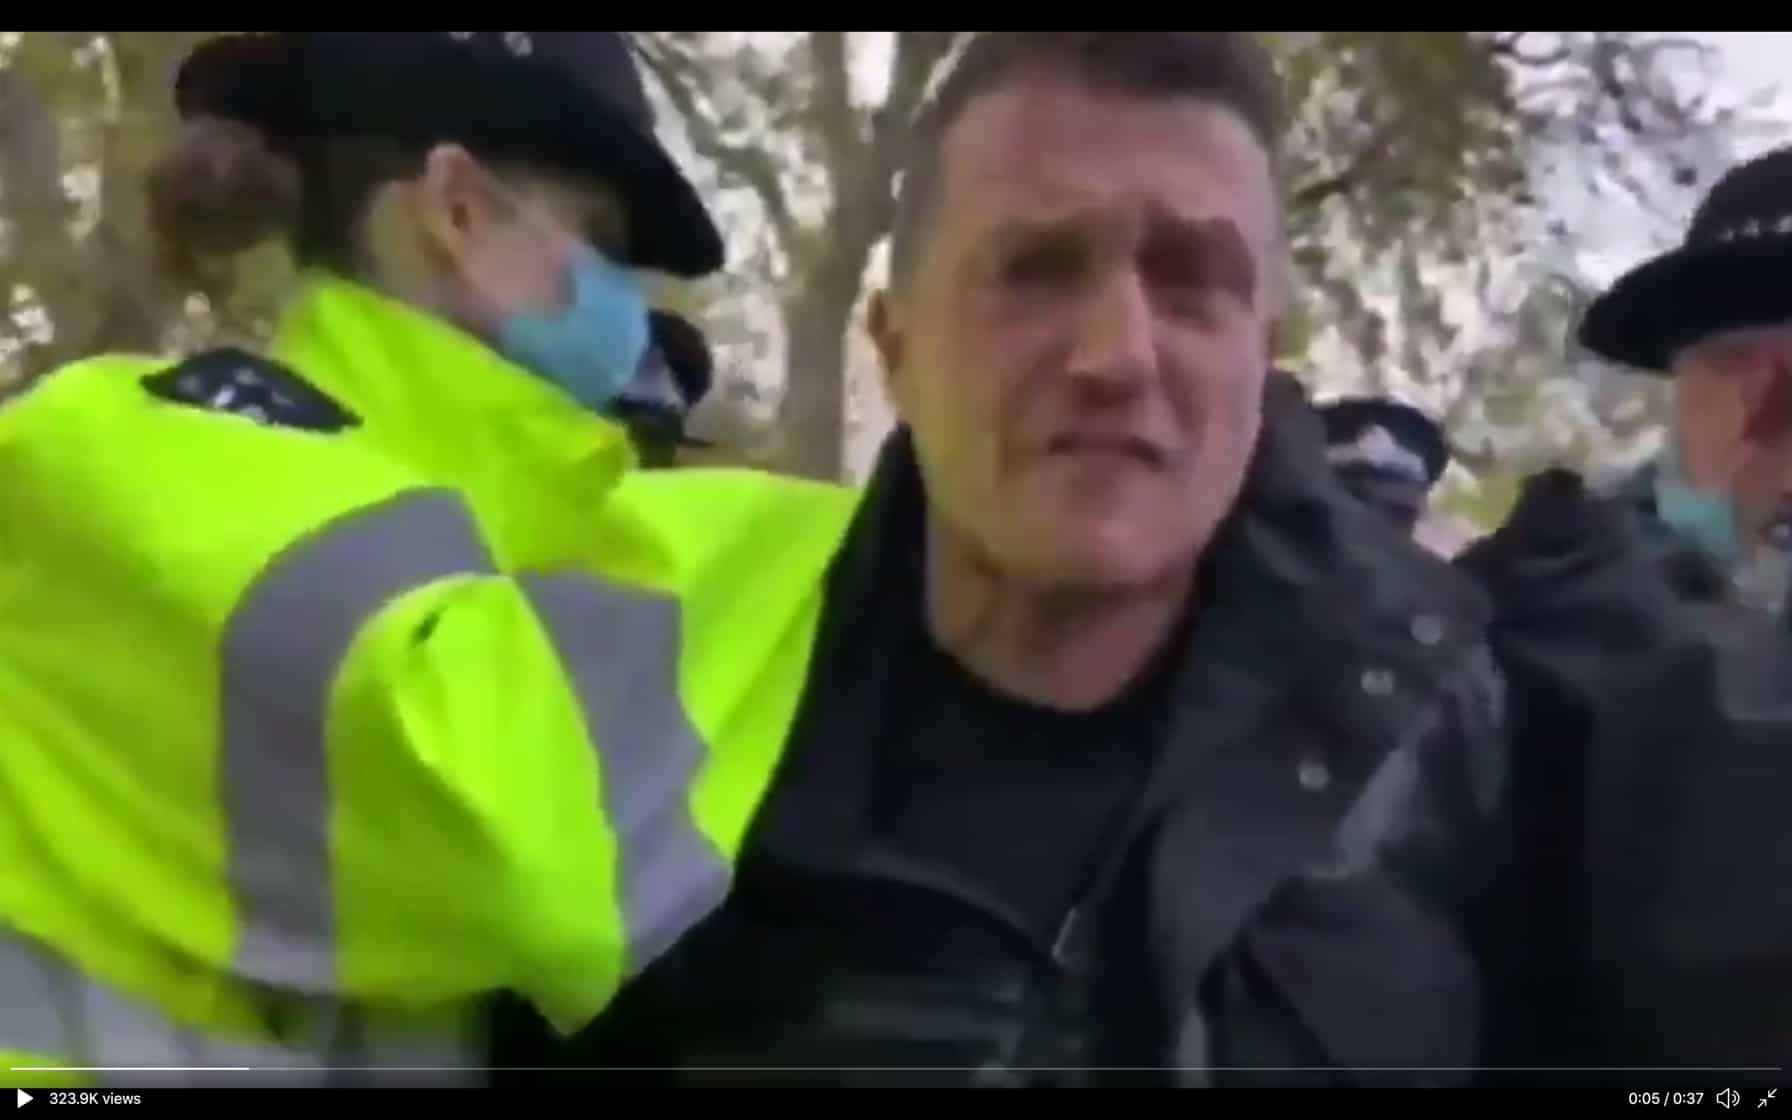 Watch: Tommy Robinson pleas “I haven’t done anything” as he’s arrested at Hyde Park rally